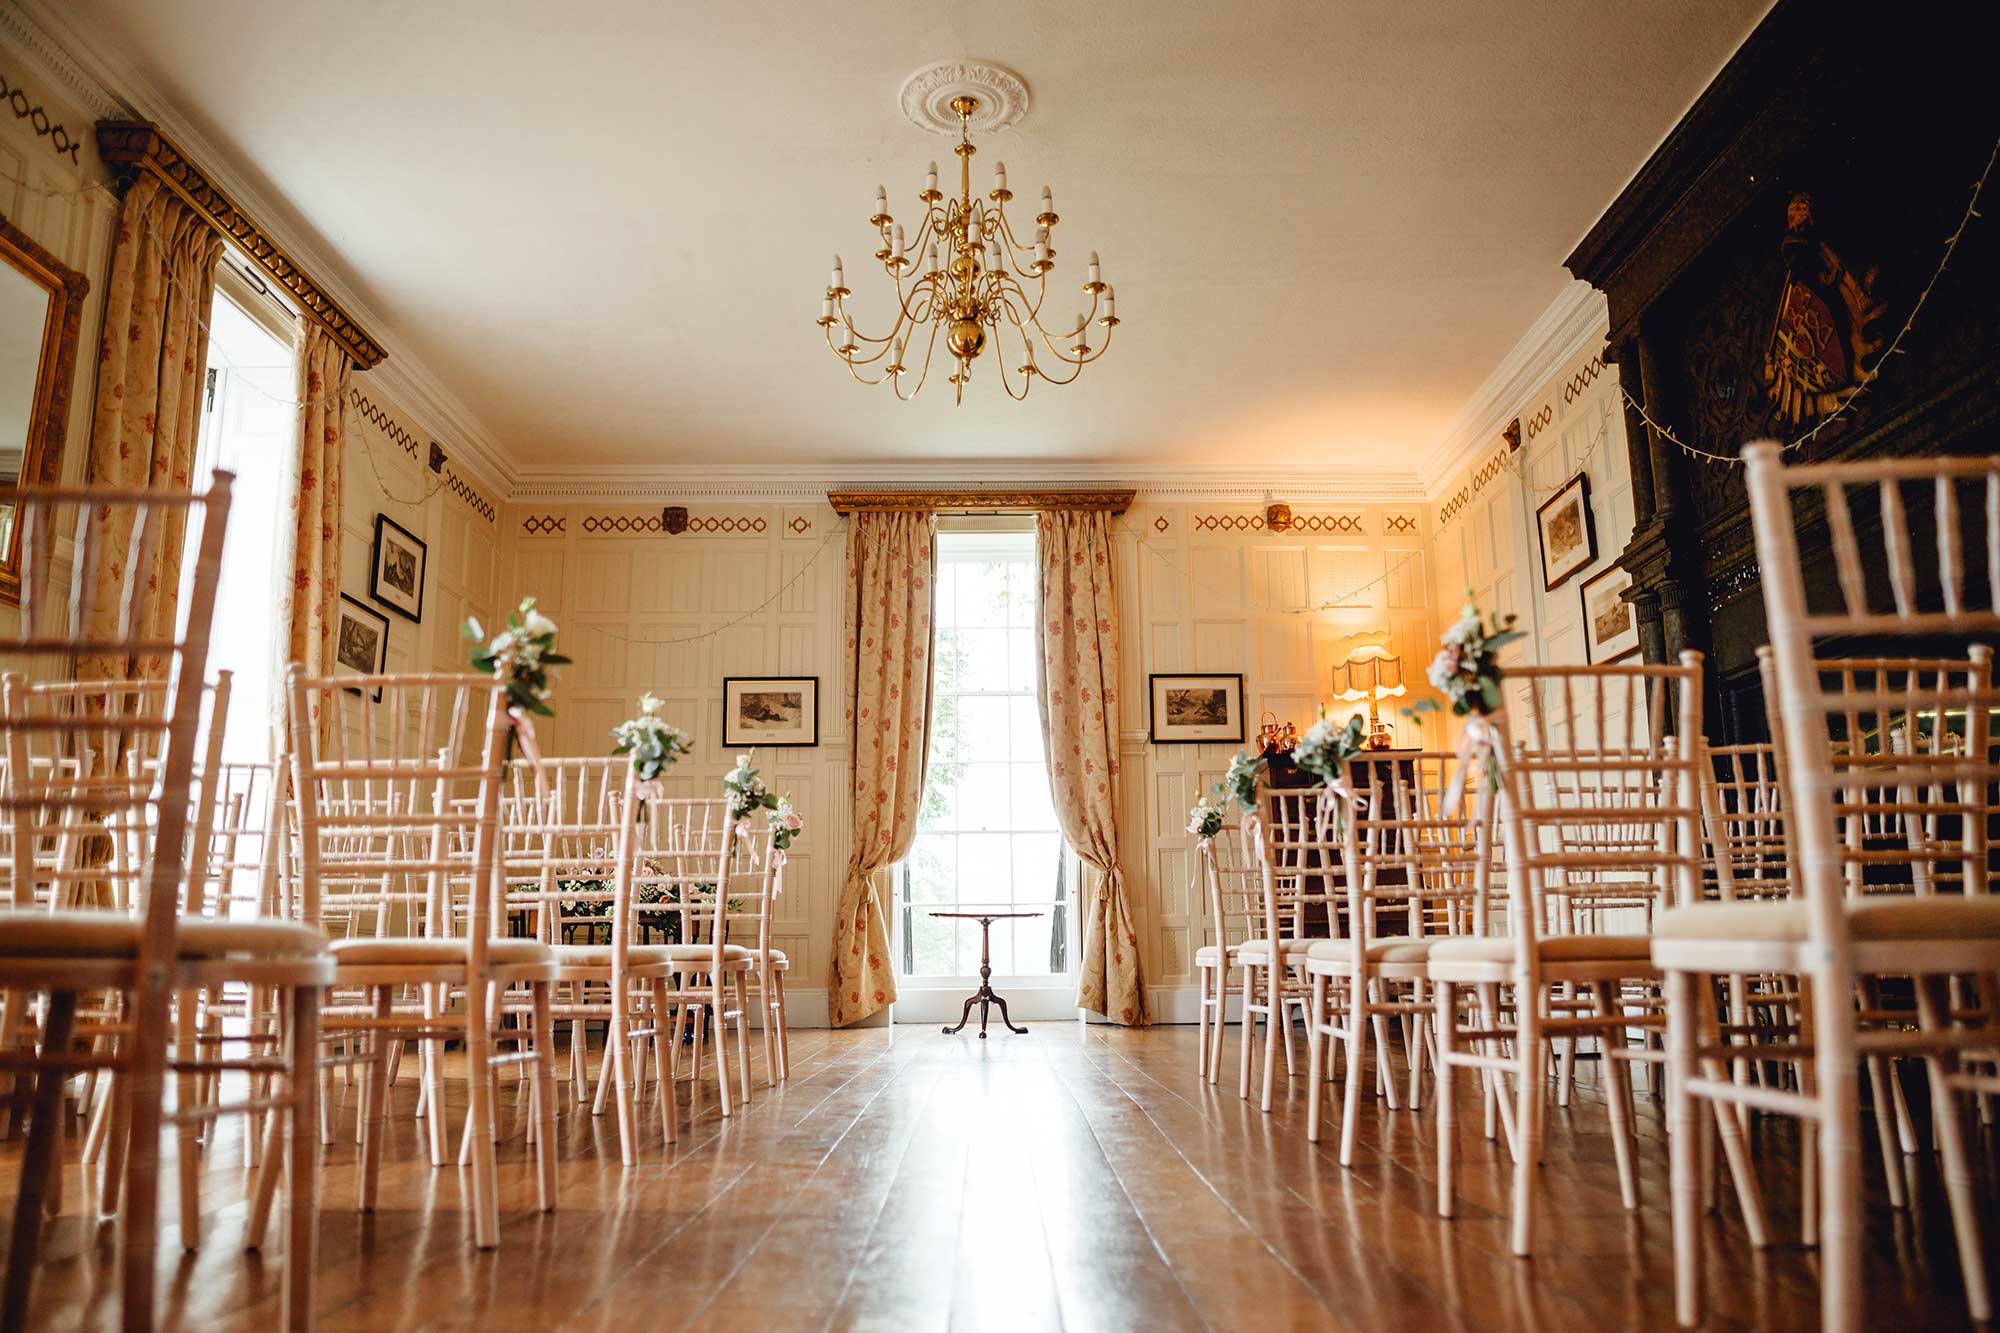 Homme-House-Panelled-Room-laid-out-for-wedding-ceremony